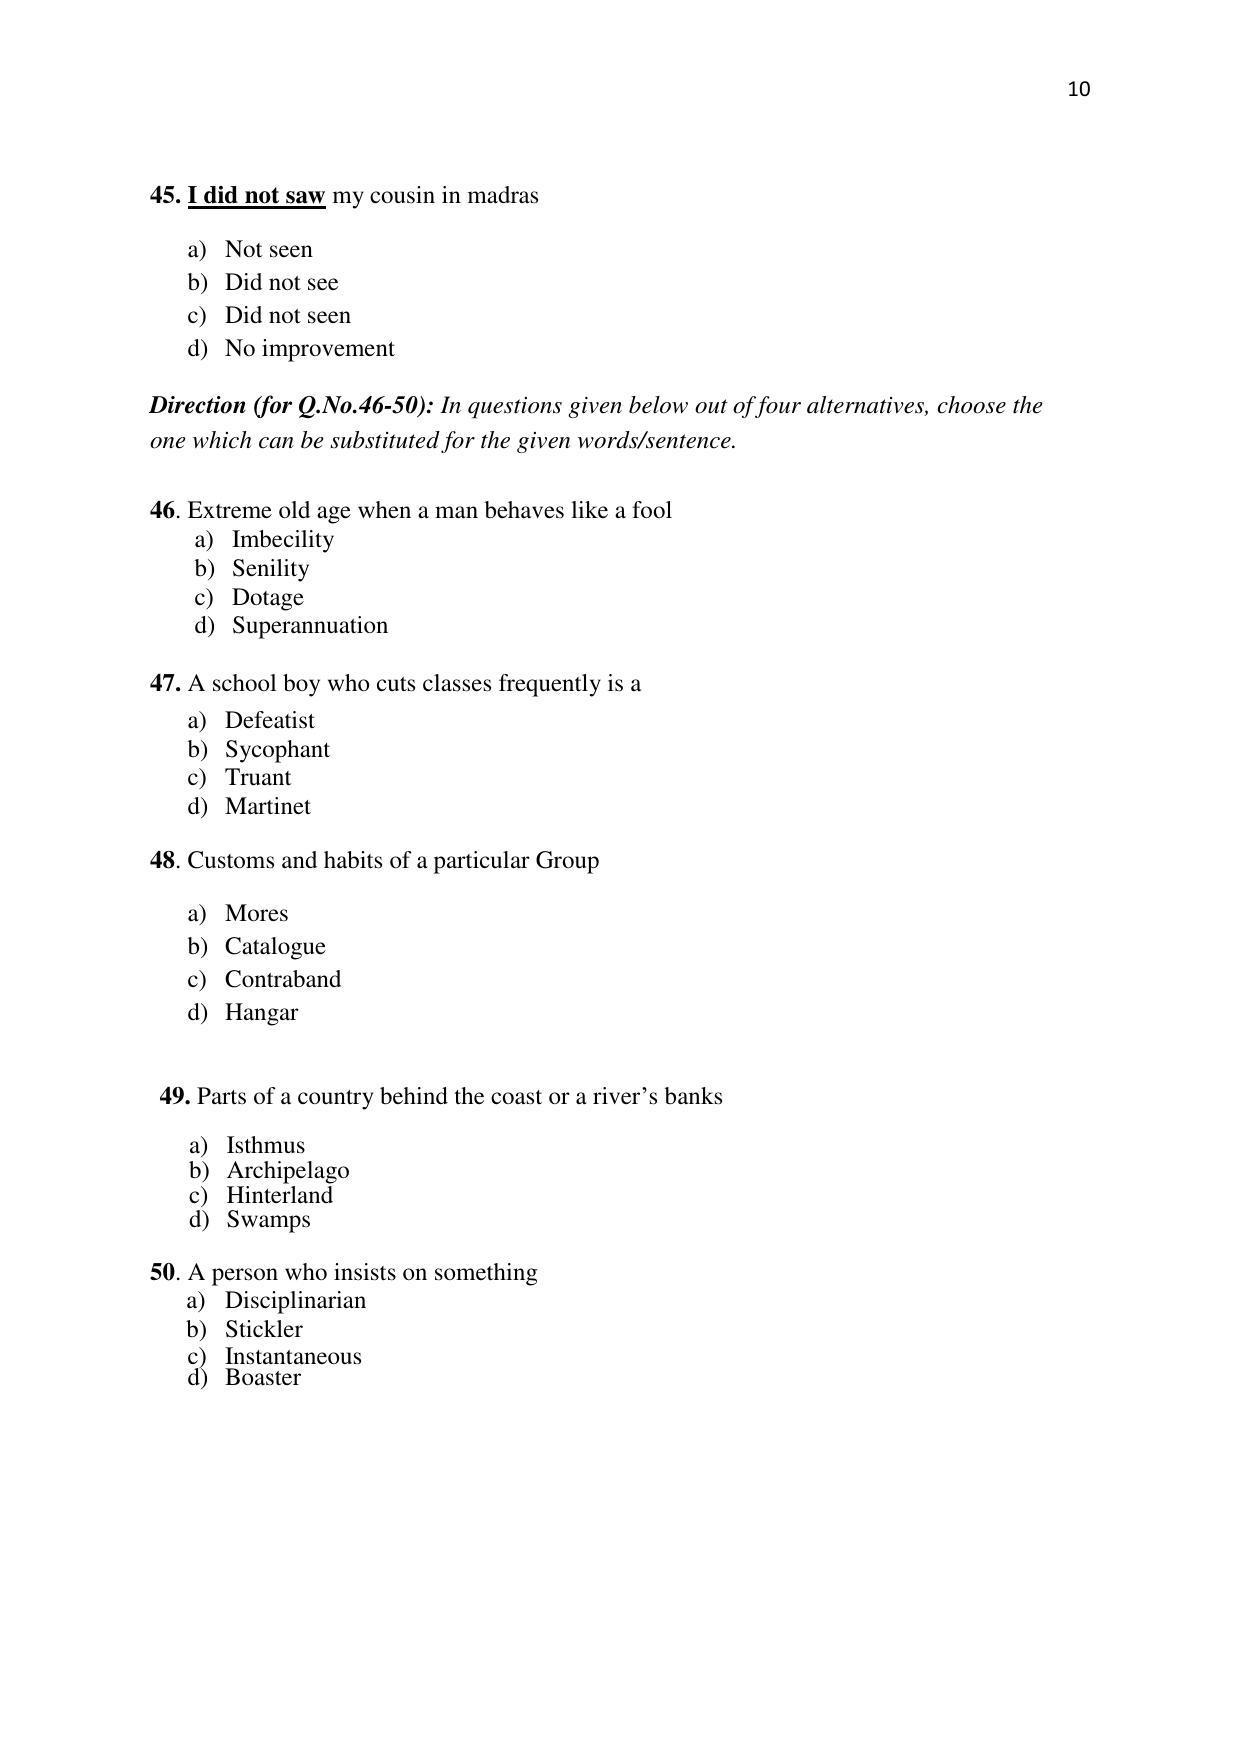 KMAT Question Papers - November 2016 - Page 10